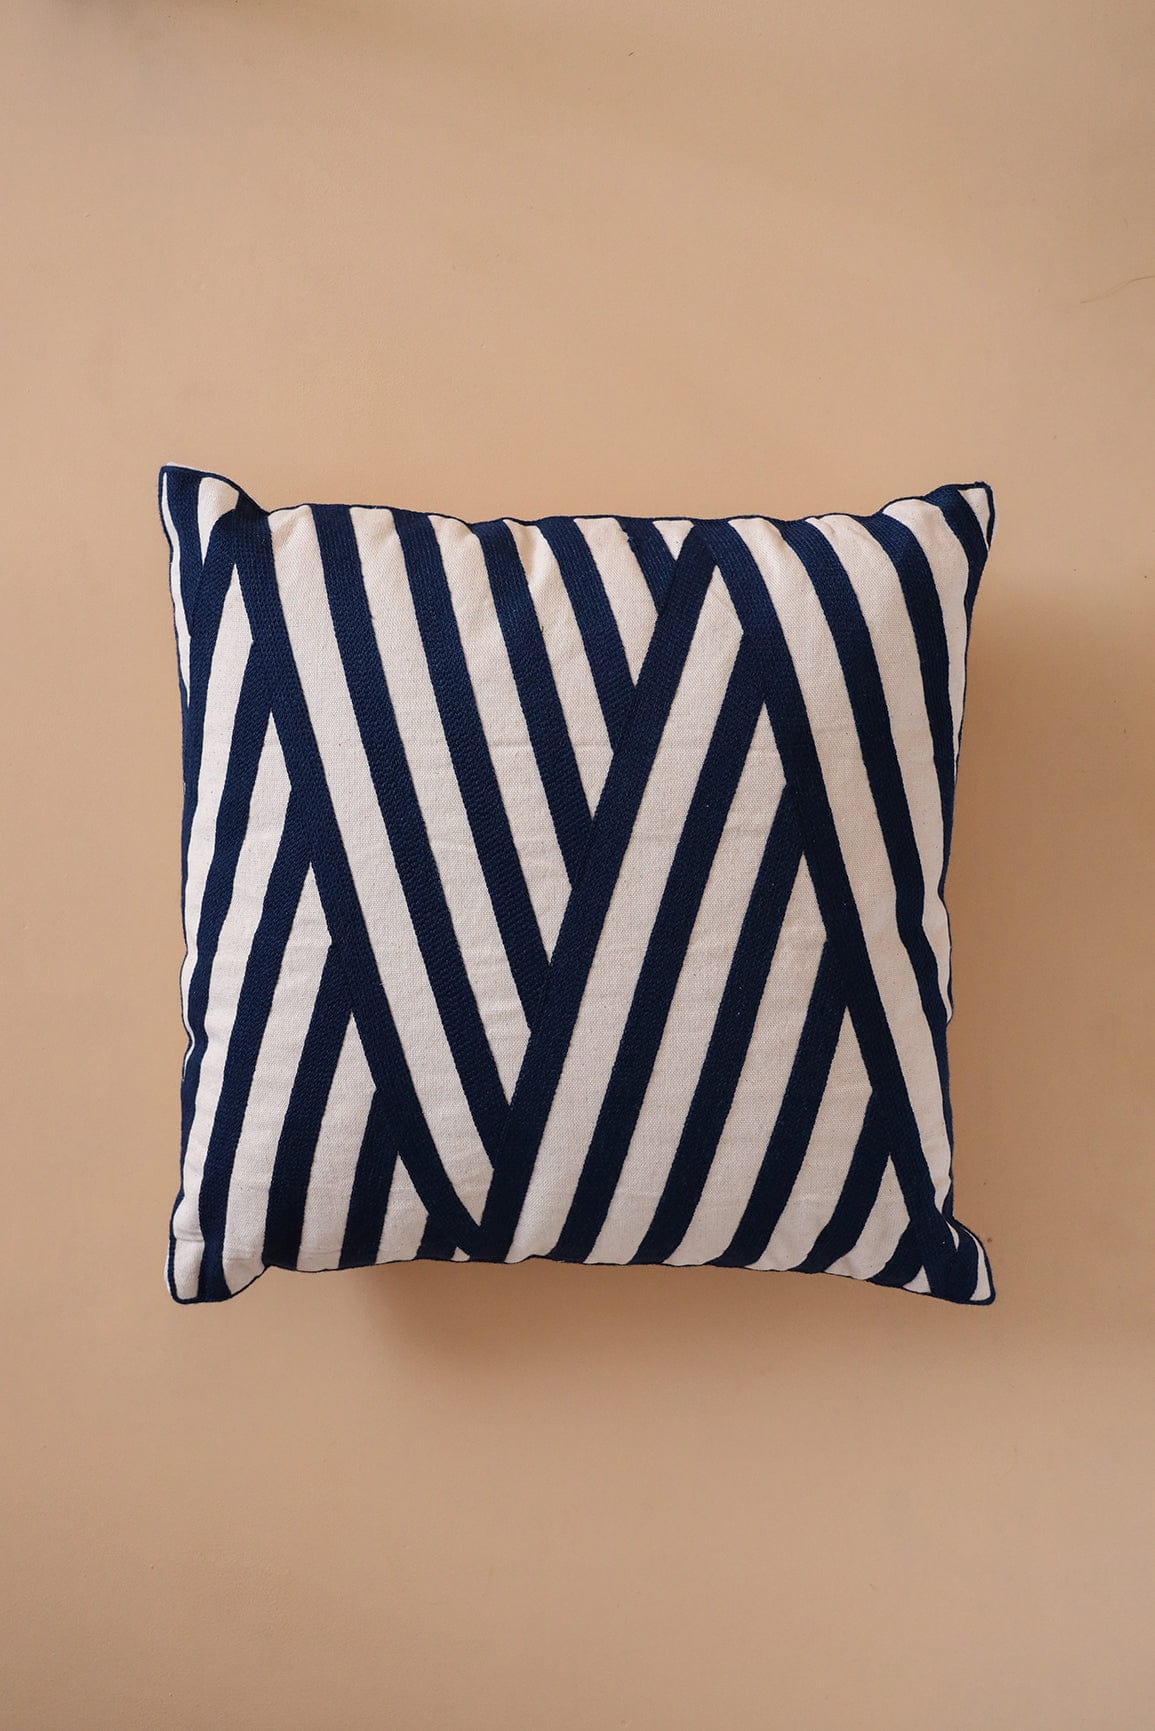 doeraa Navy Blue Stripped Embroidery on off white cotton Cushion Cover (16*16 inches)